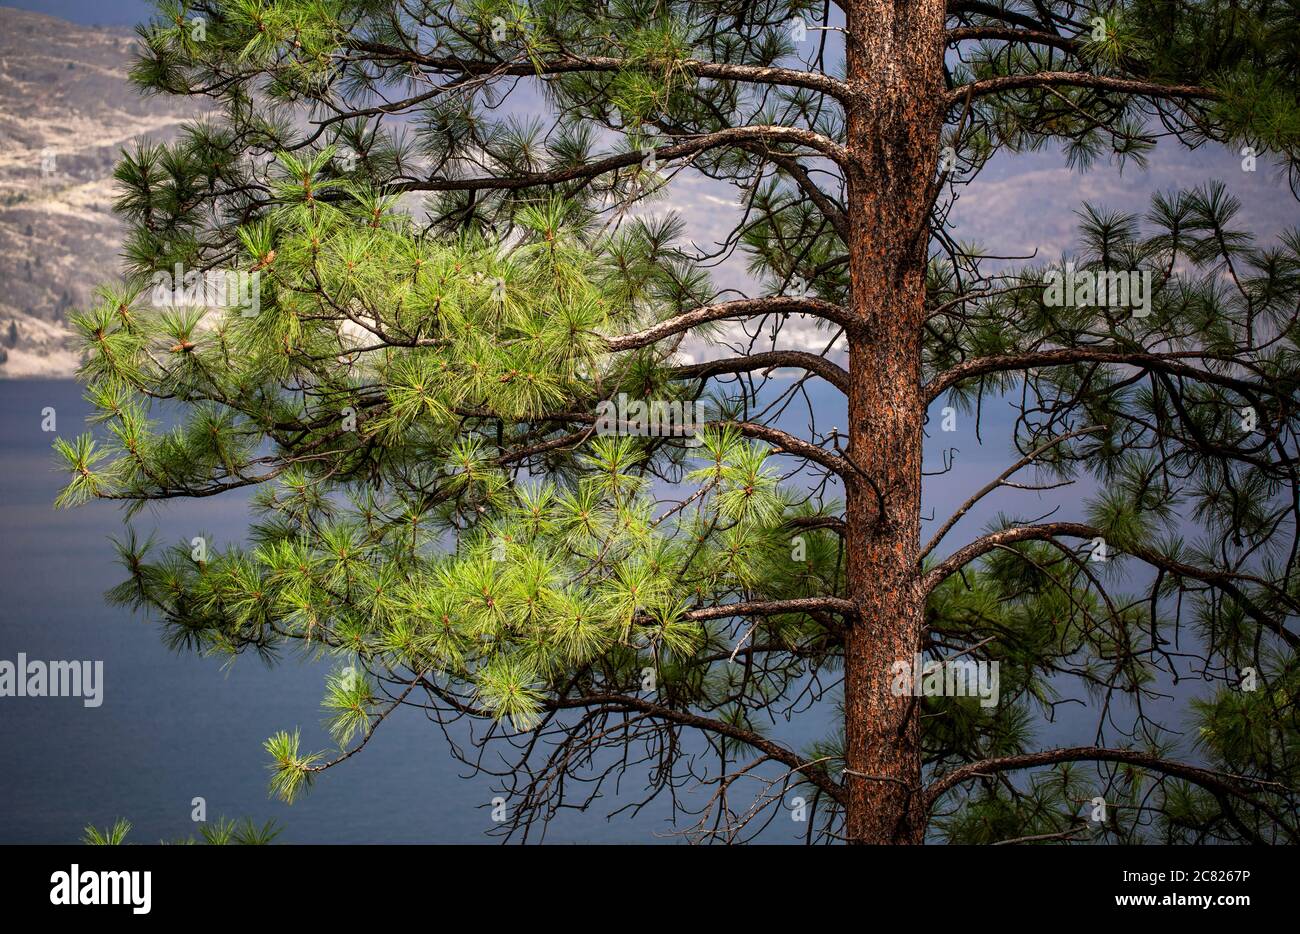 An evergreen tree in the foreground with Okanagan Lake and shoreline in the background, Okanagan Valley; Peachland, British Columbia, Canada Stock Photo